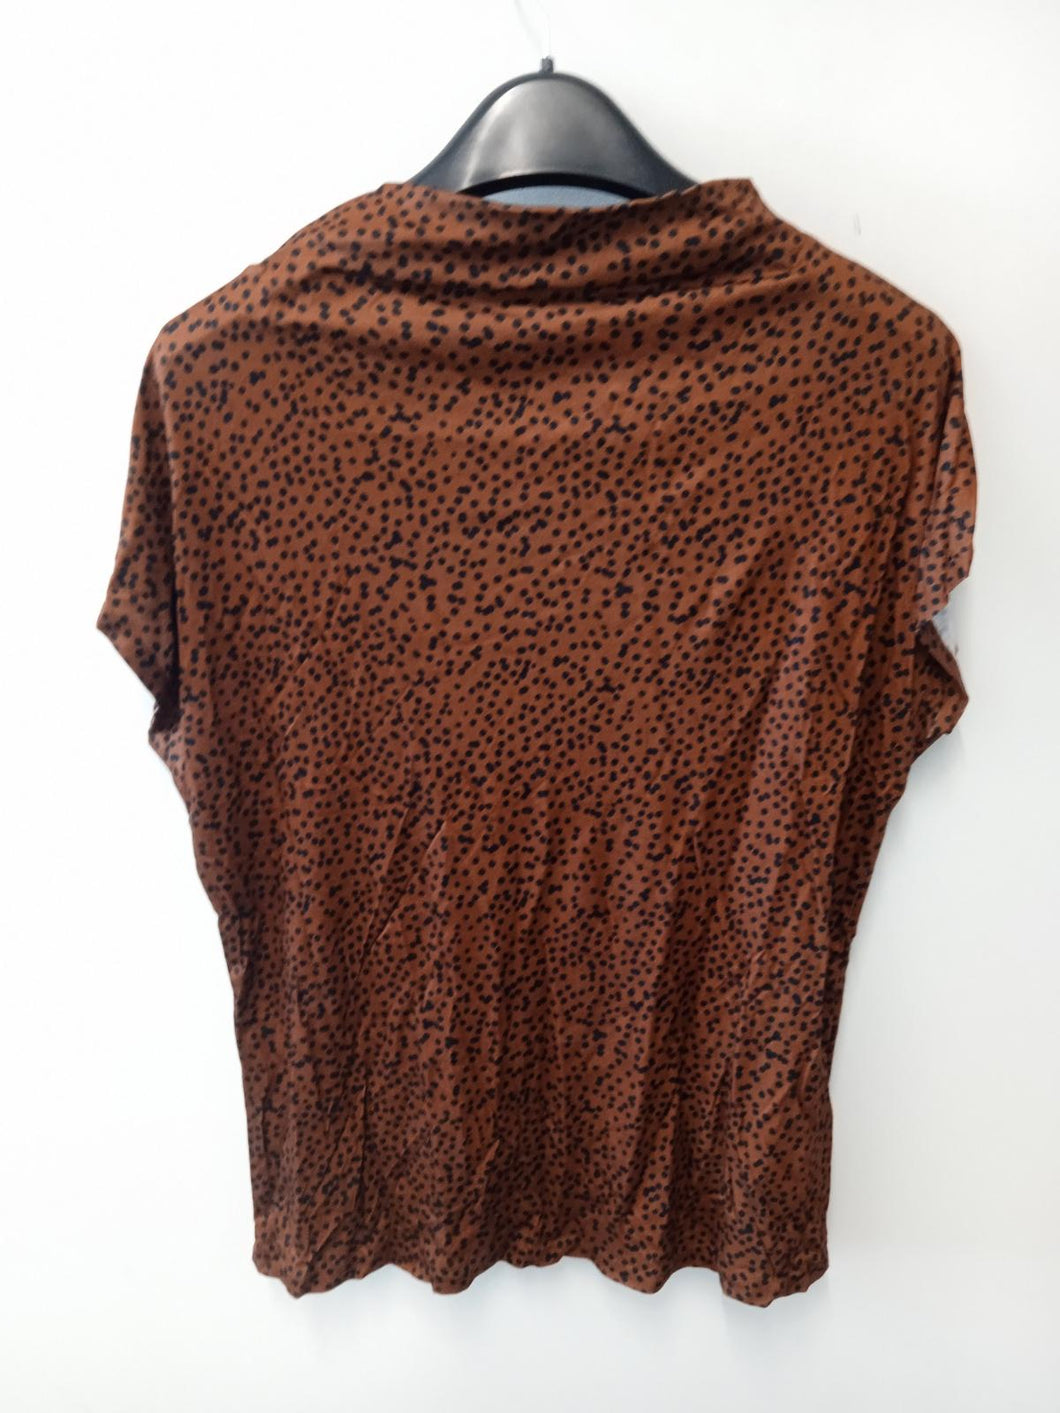 REISS Ladies Brown Spotted Cap Sleeve High Neck Blouse Size UK M